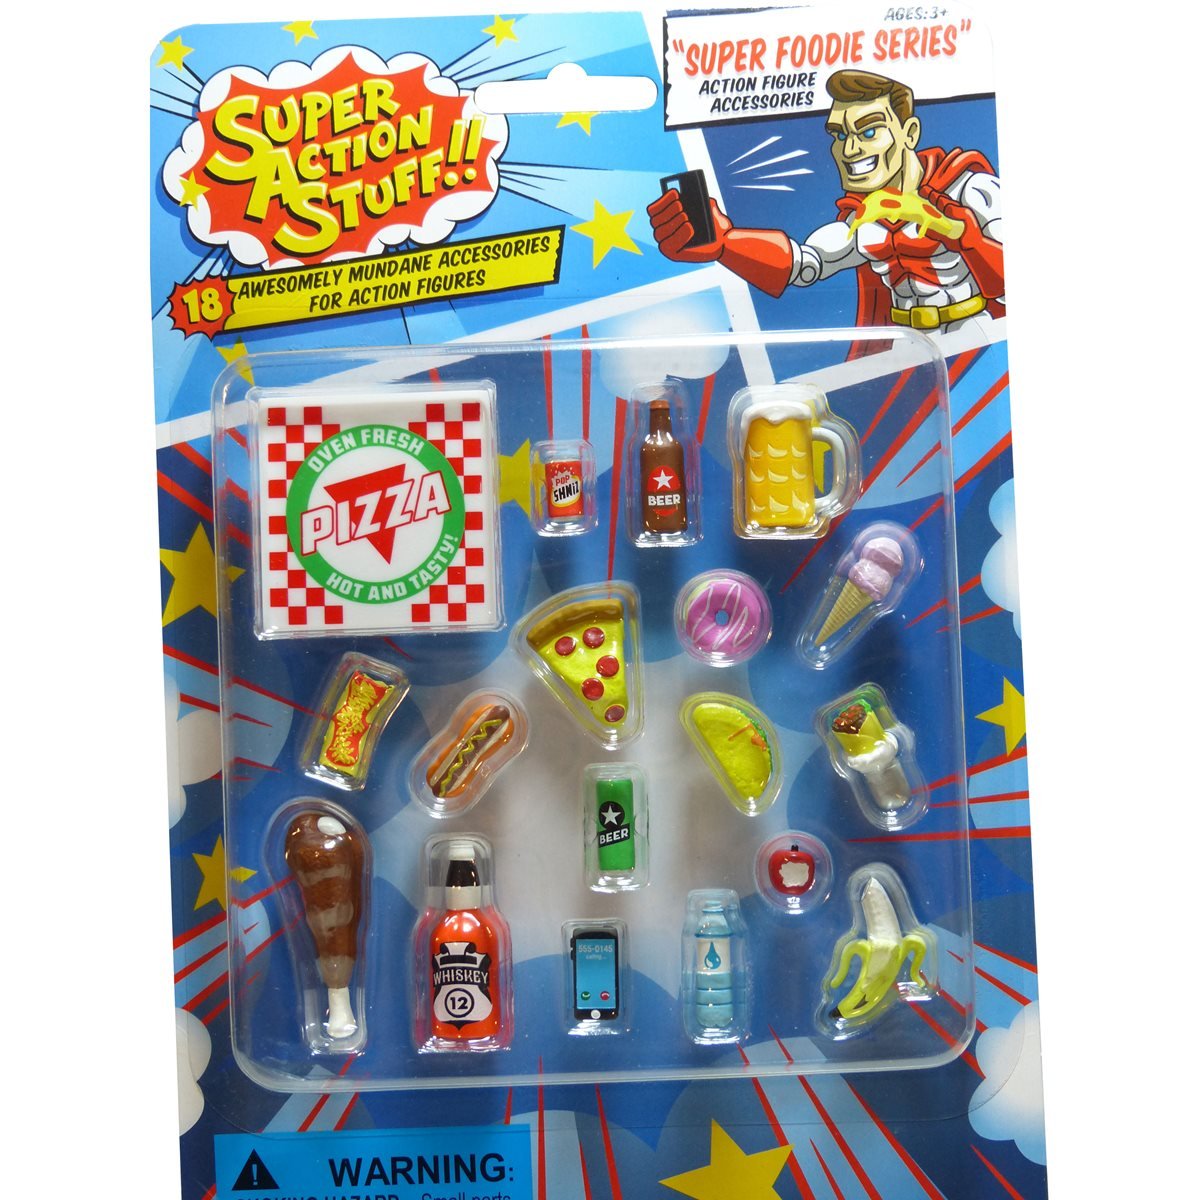 Super Action Stuff 18 Piece Super Foodie Action Figure Accessories 1:12 and  Six inch Scale Compatible Miniature Plastic Food Accessories That fit Most  5 to 7 inch Action Figures for Hilari 